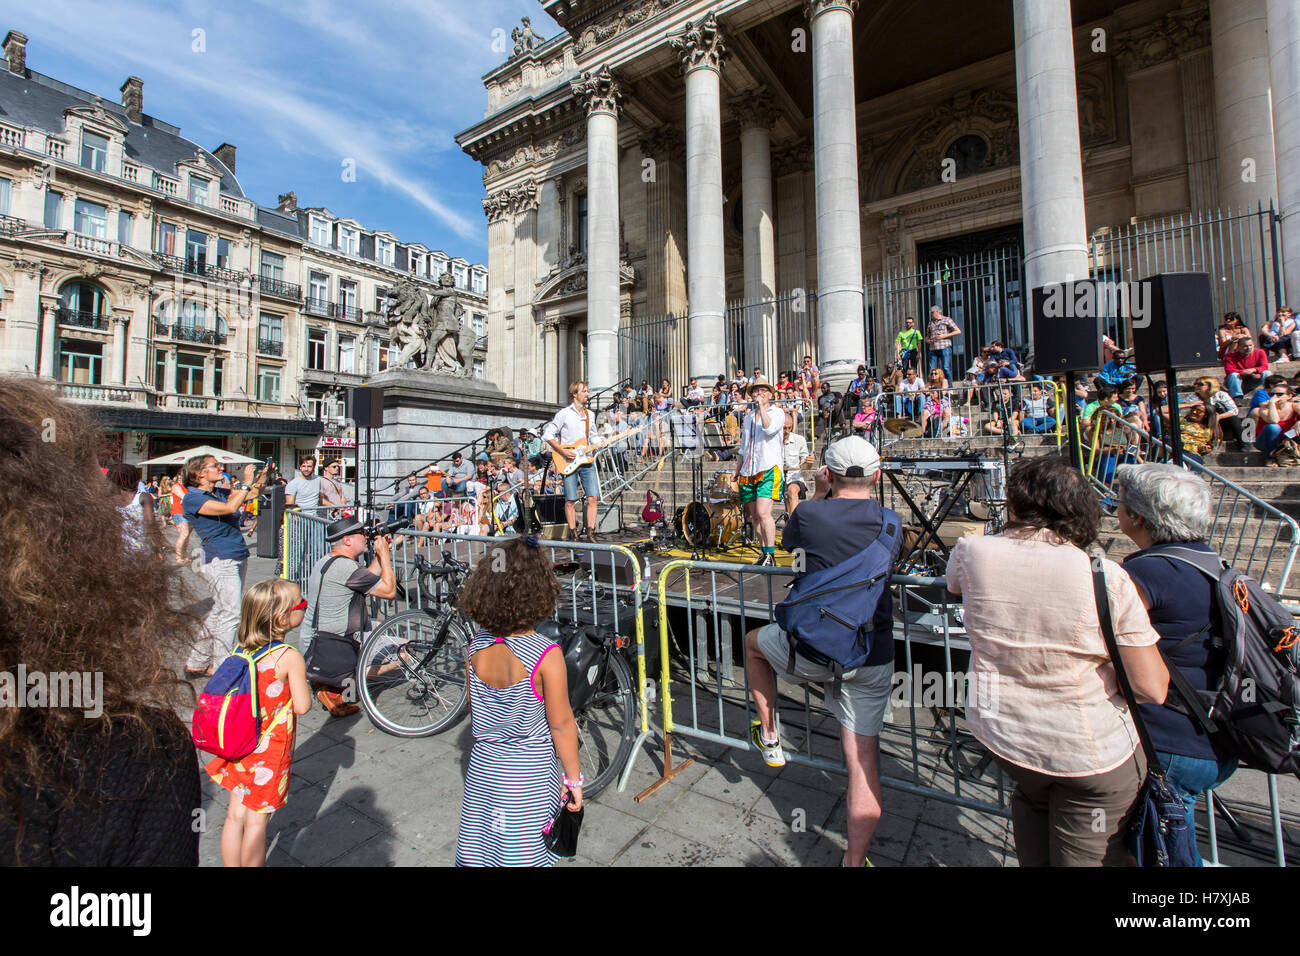 Brussels, Belgium, the stock market square on Boulevard Anspach, live music, concert before the stock market, many spectators, Stock Photo